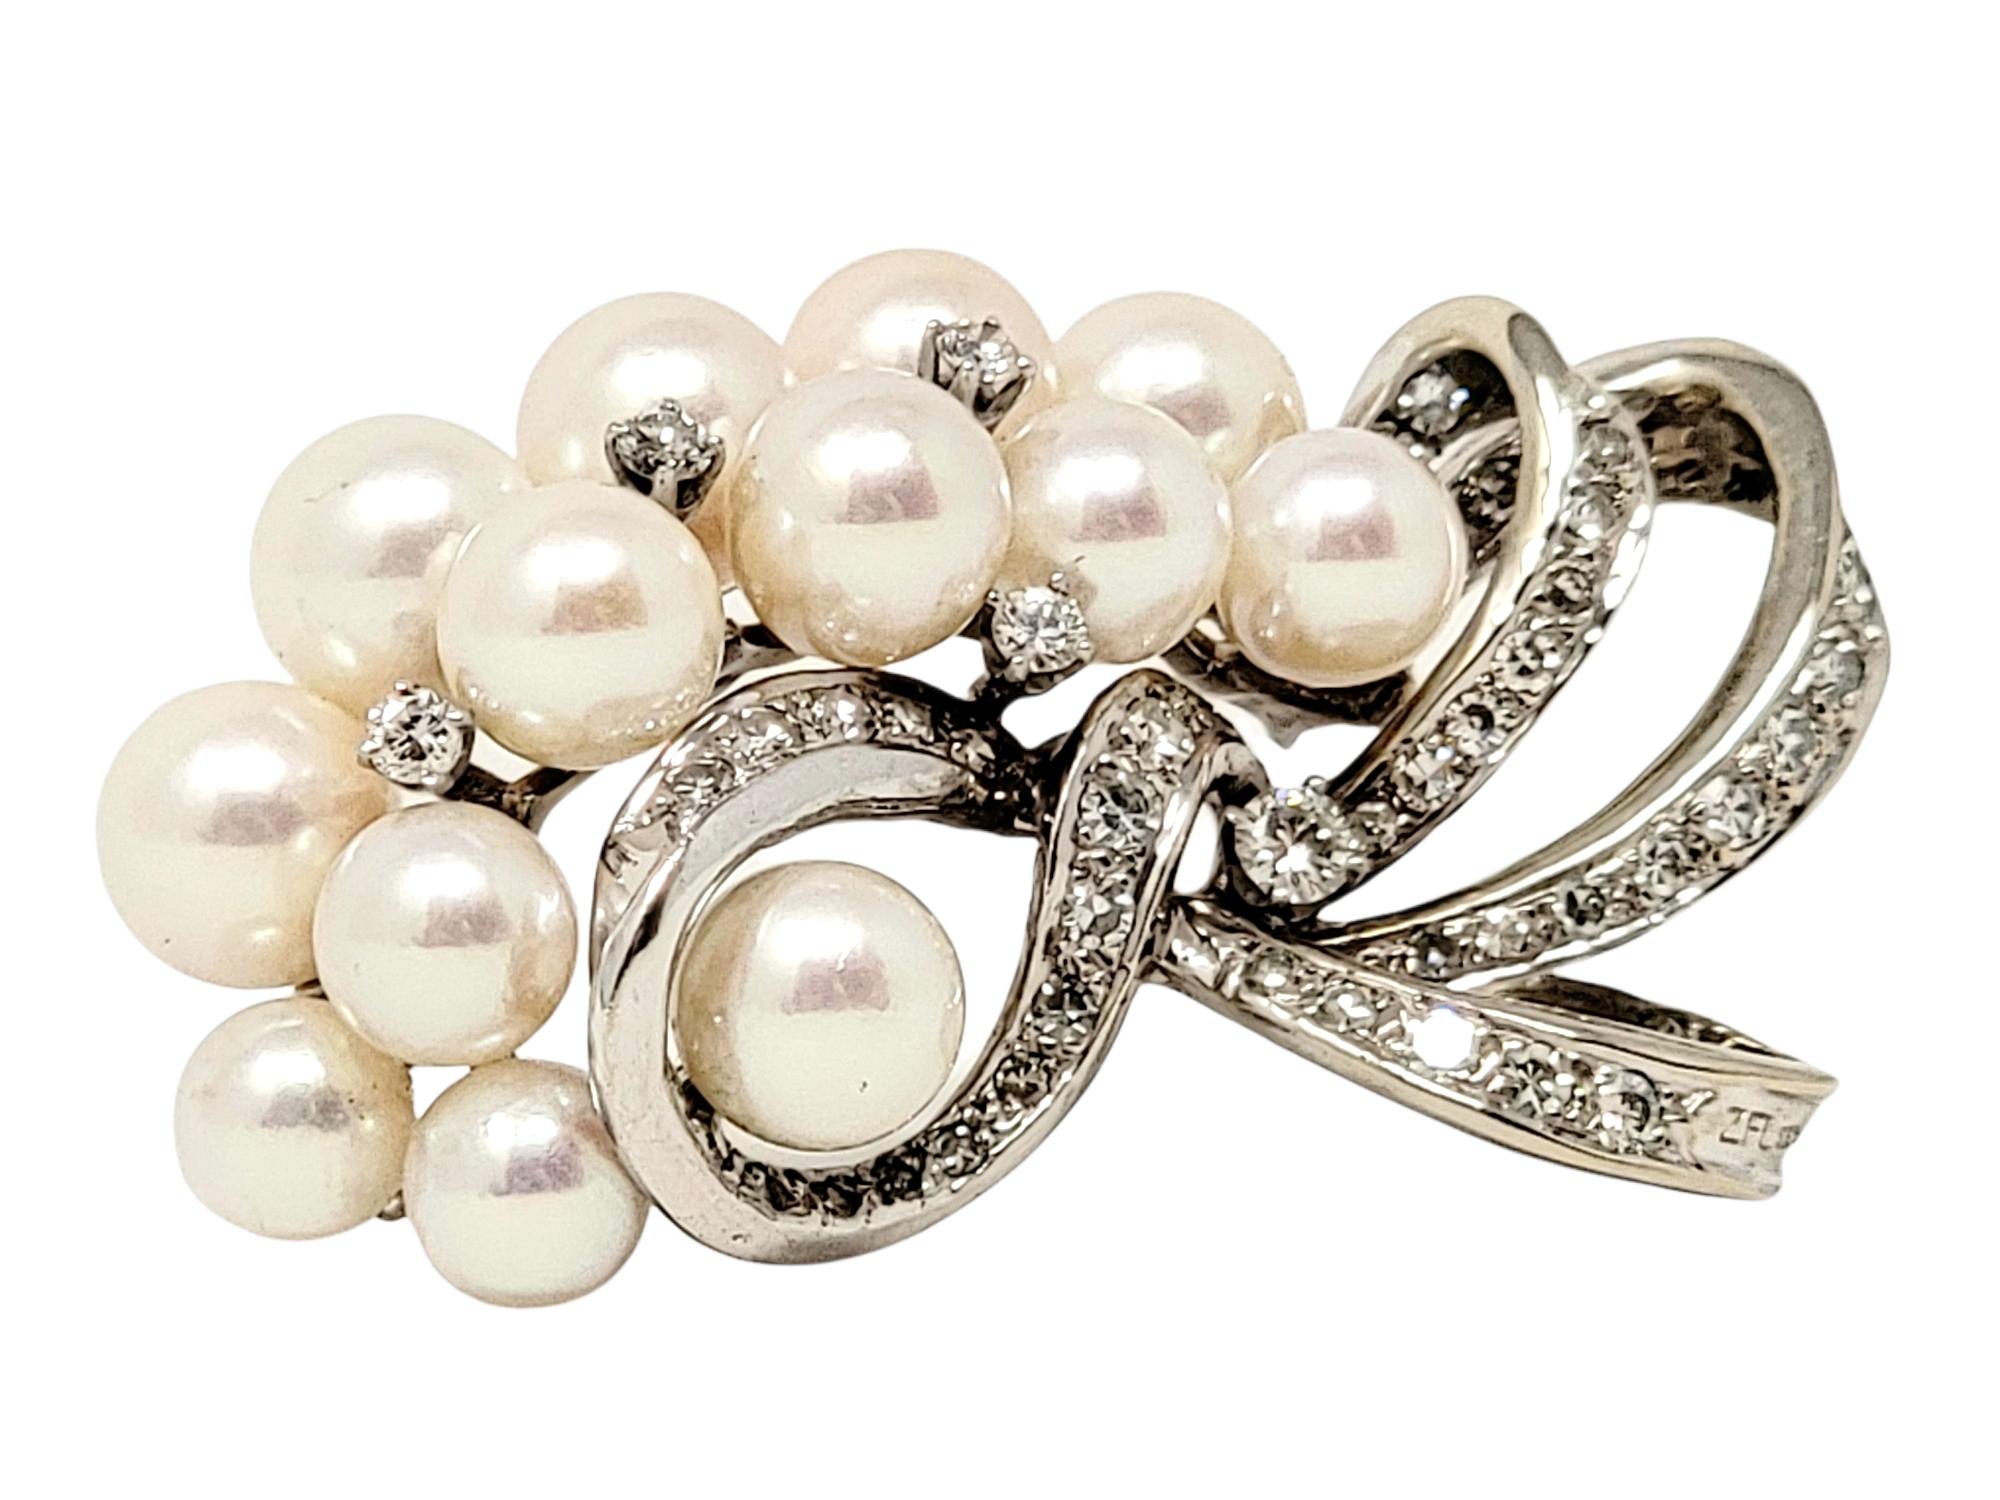 Exquisite vintage style brooch with incredible fine details. This gorgeous brooch is made of 14 karat white gold and arranged in a horizontal layout. The top portion features 2 rows of white cultured pearls, accented by a few single round diamonds.